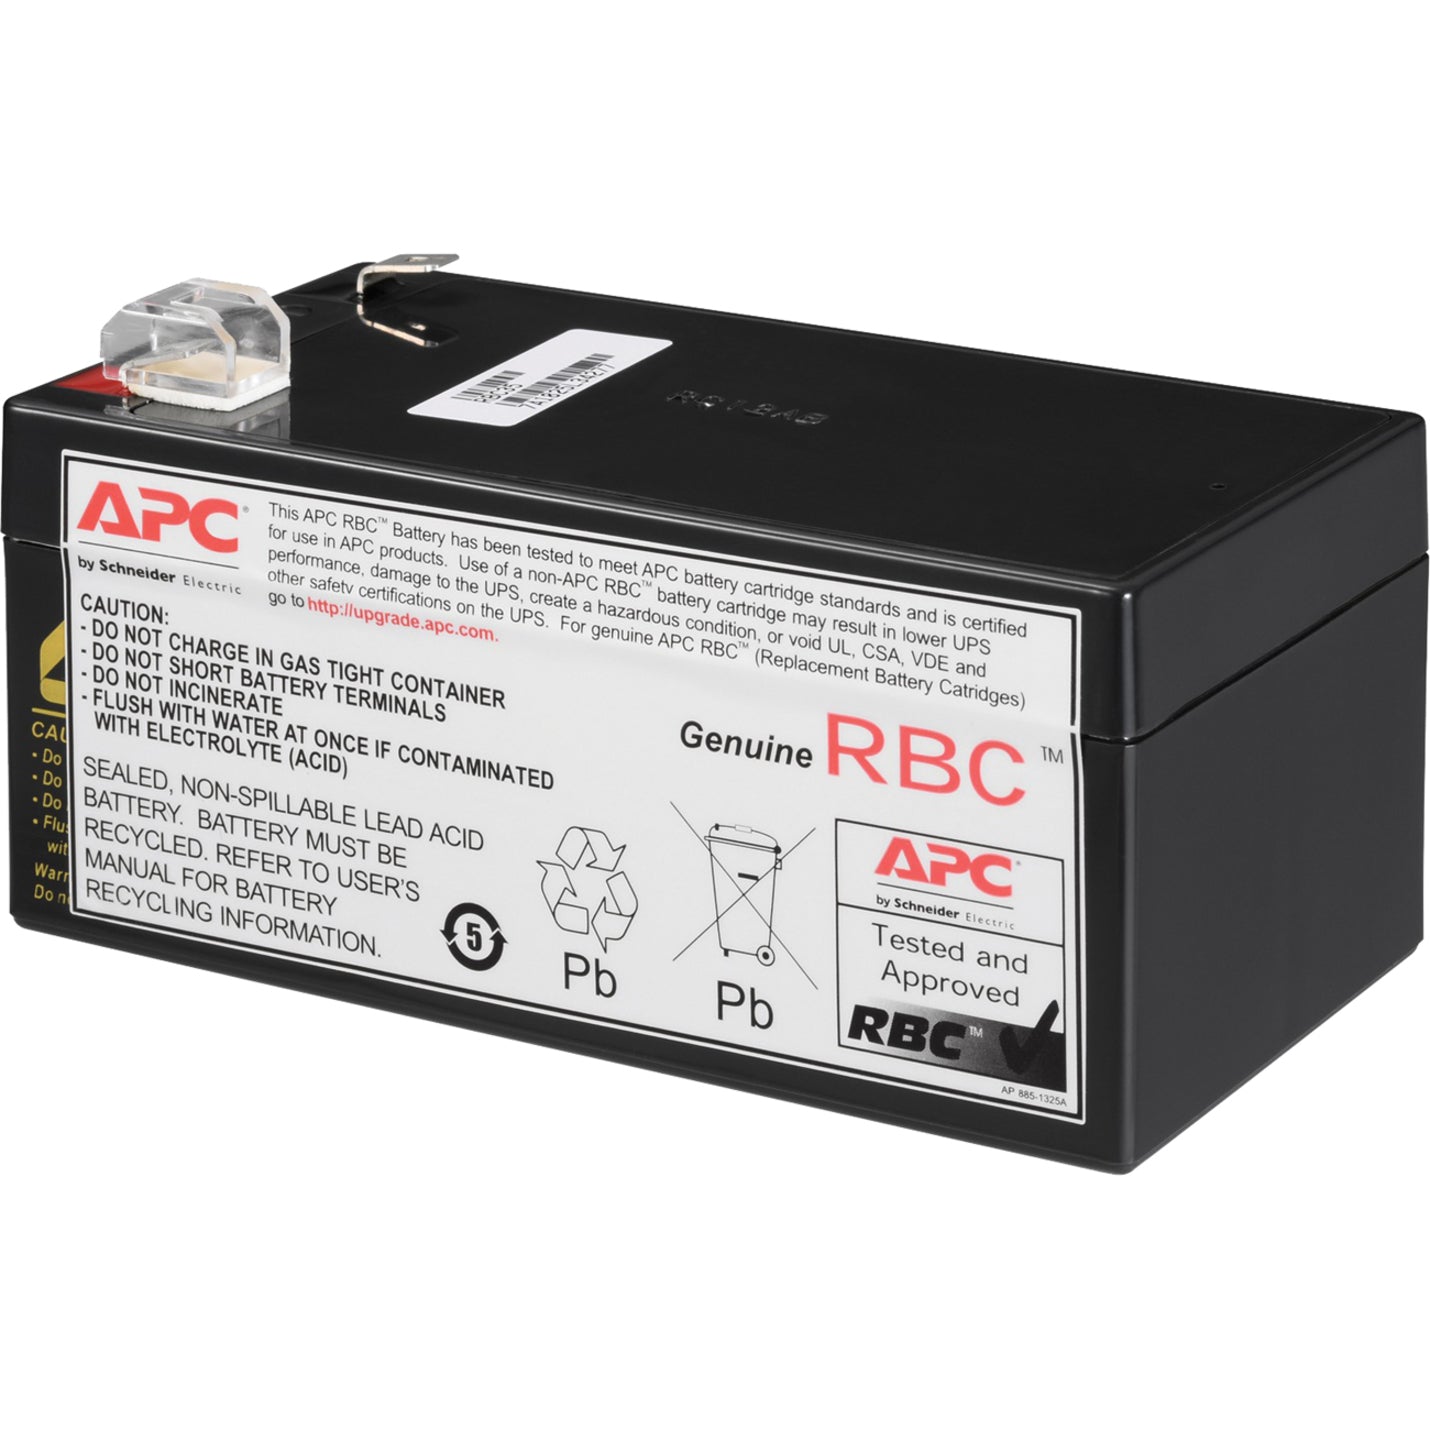 APC RBC35 Replacement Battery Cartridge #35, 2 Year Warranty, Hot Swappable, Lead Acid Battery, 5 Year Maximum Battery Life